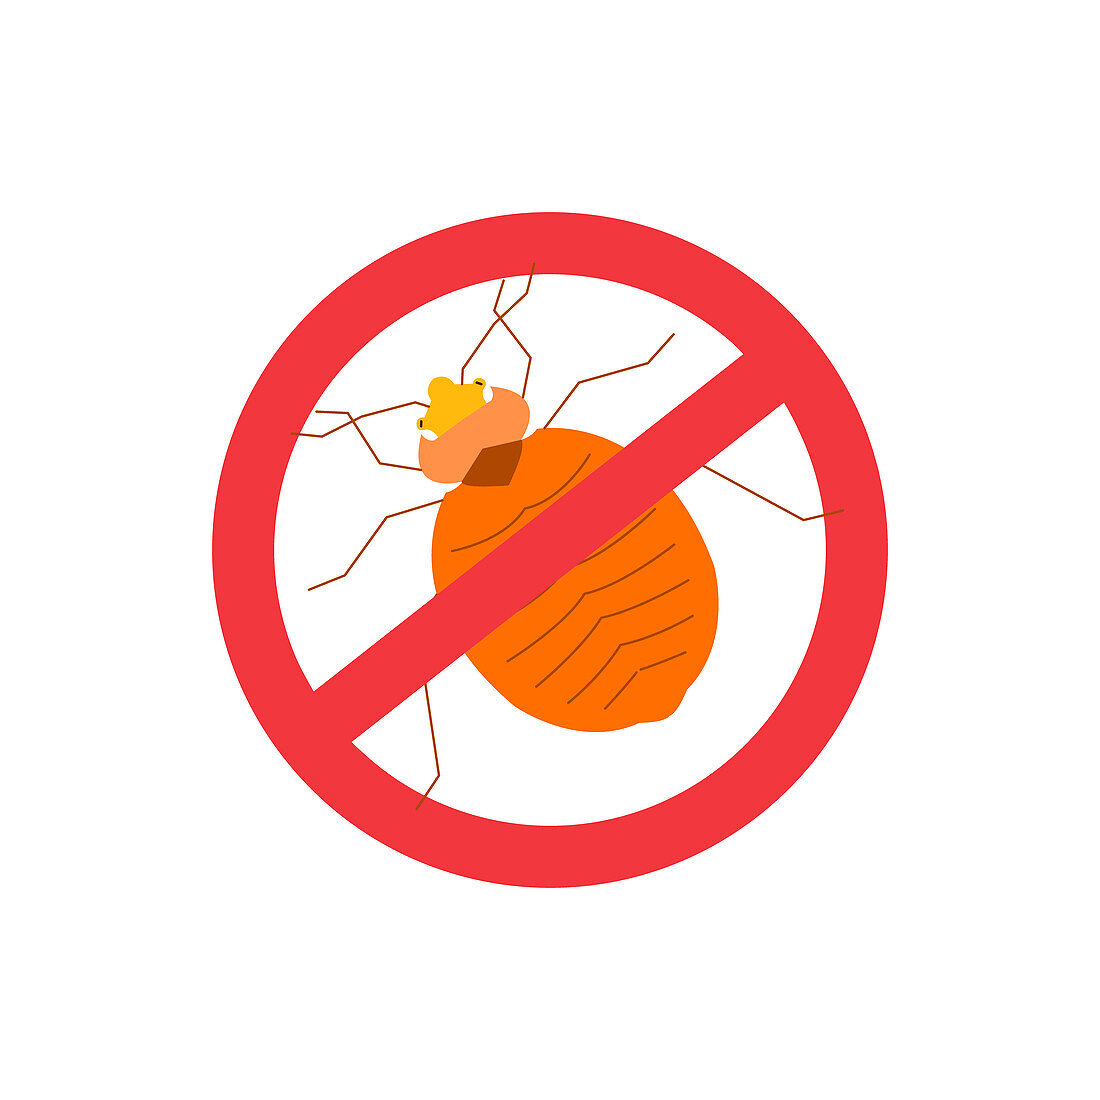 Anti-insect sign, conceptual illustration